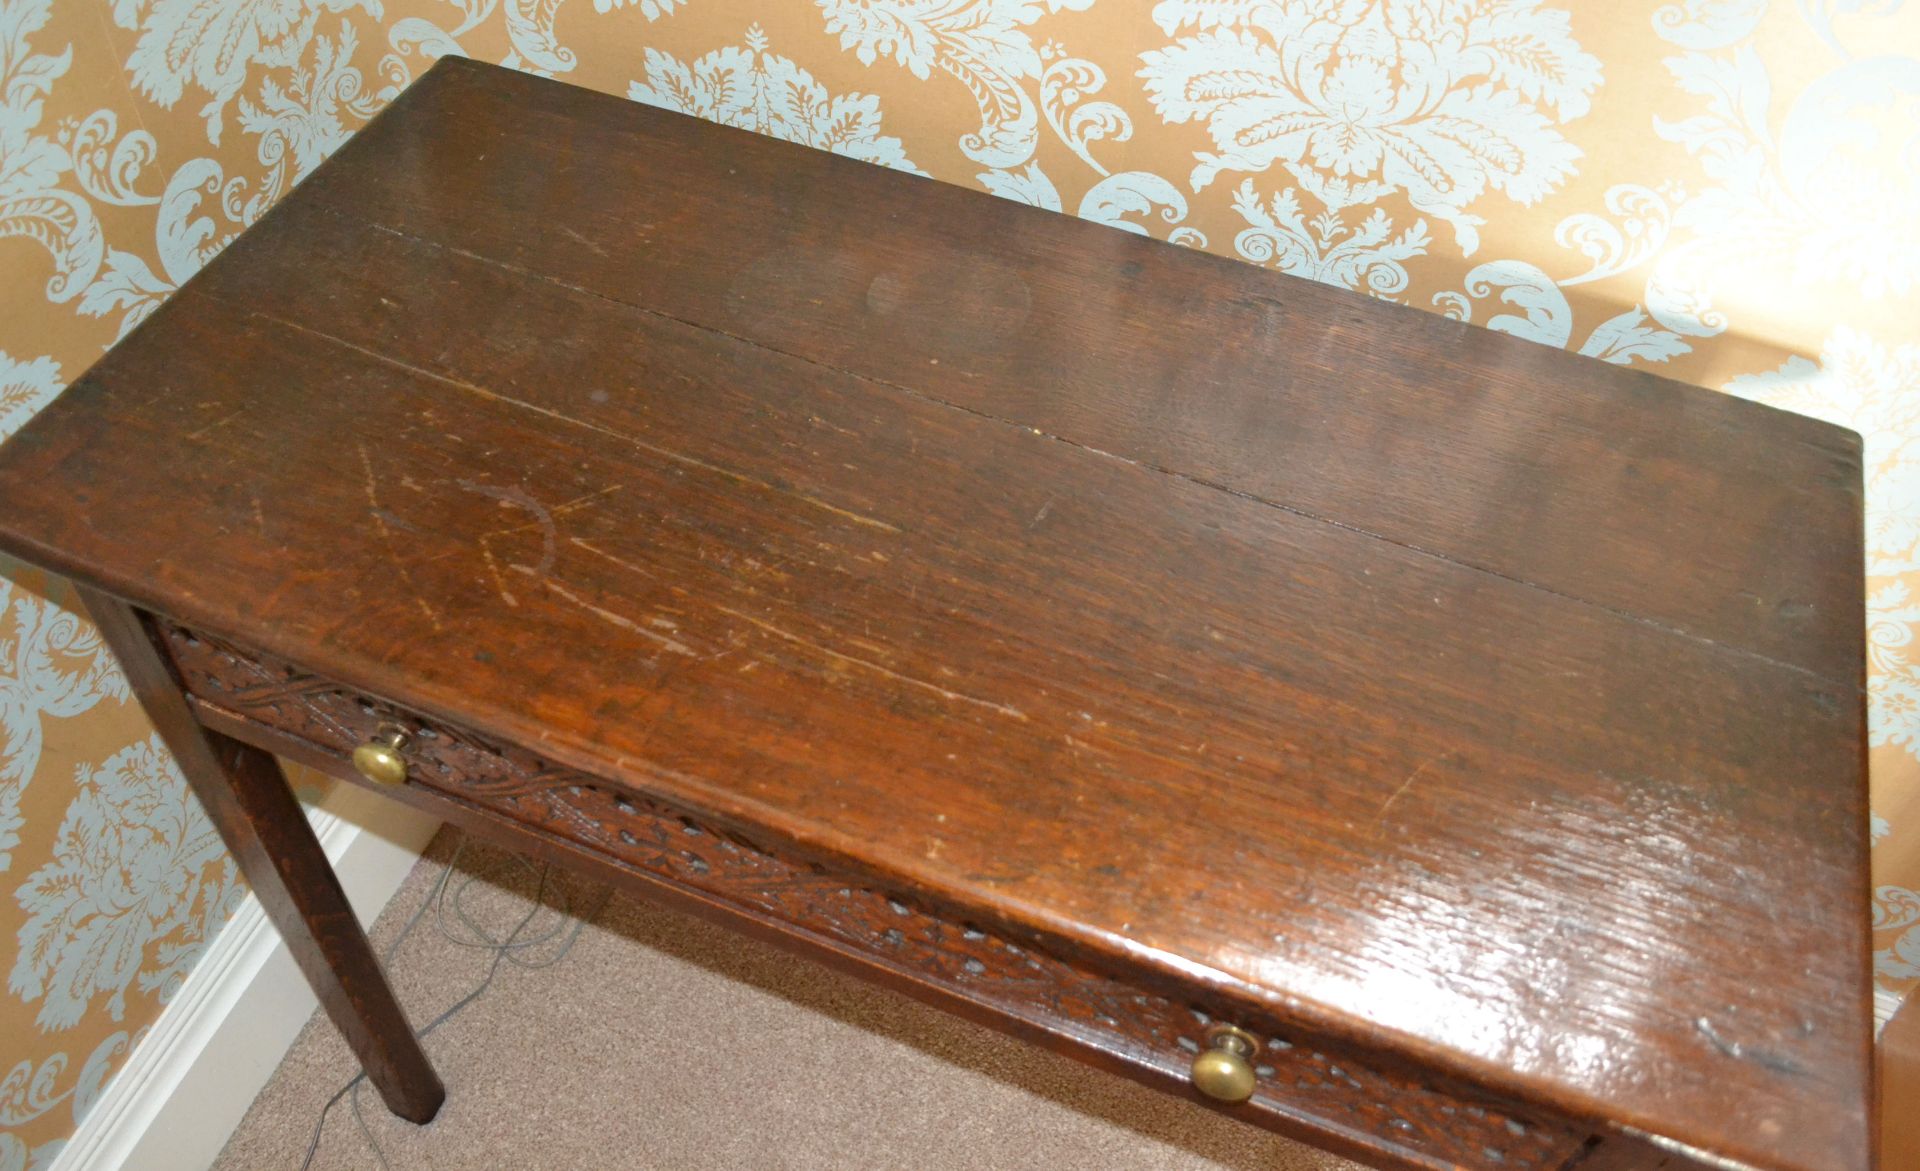 1 x Antique Solid Wood Console Table - CL226 - Location: Knutsford WA16 - NO VAT ON THE HAMMER - Image 8 of 9